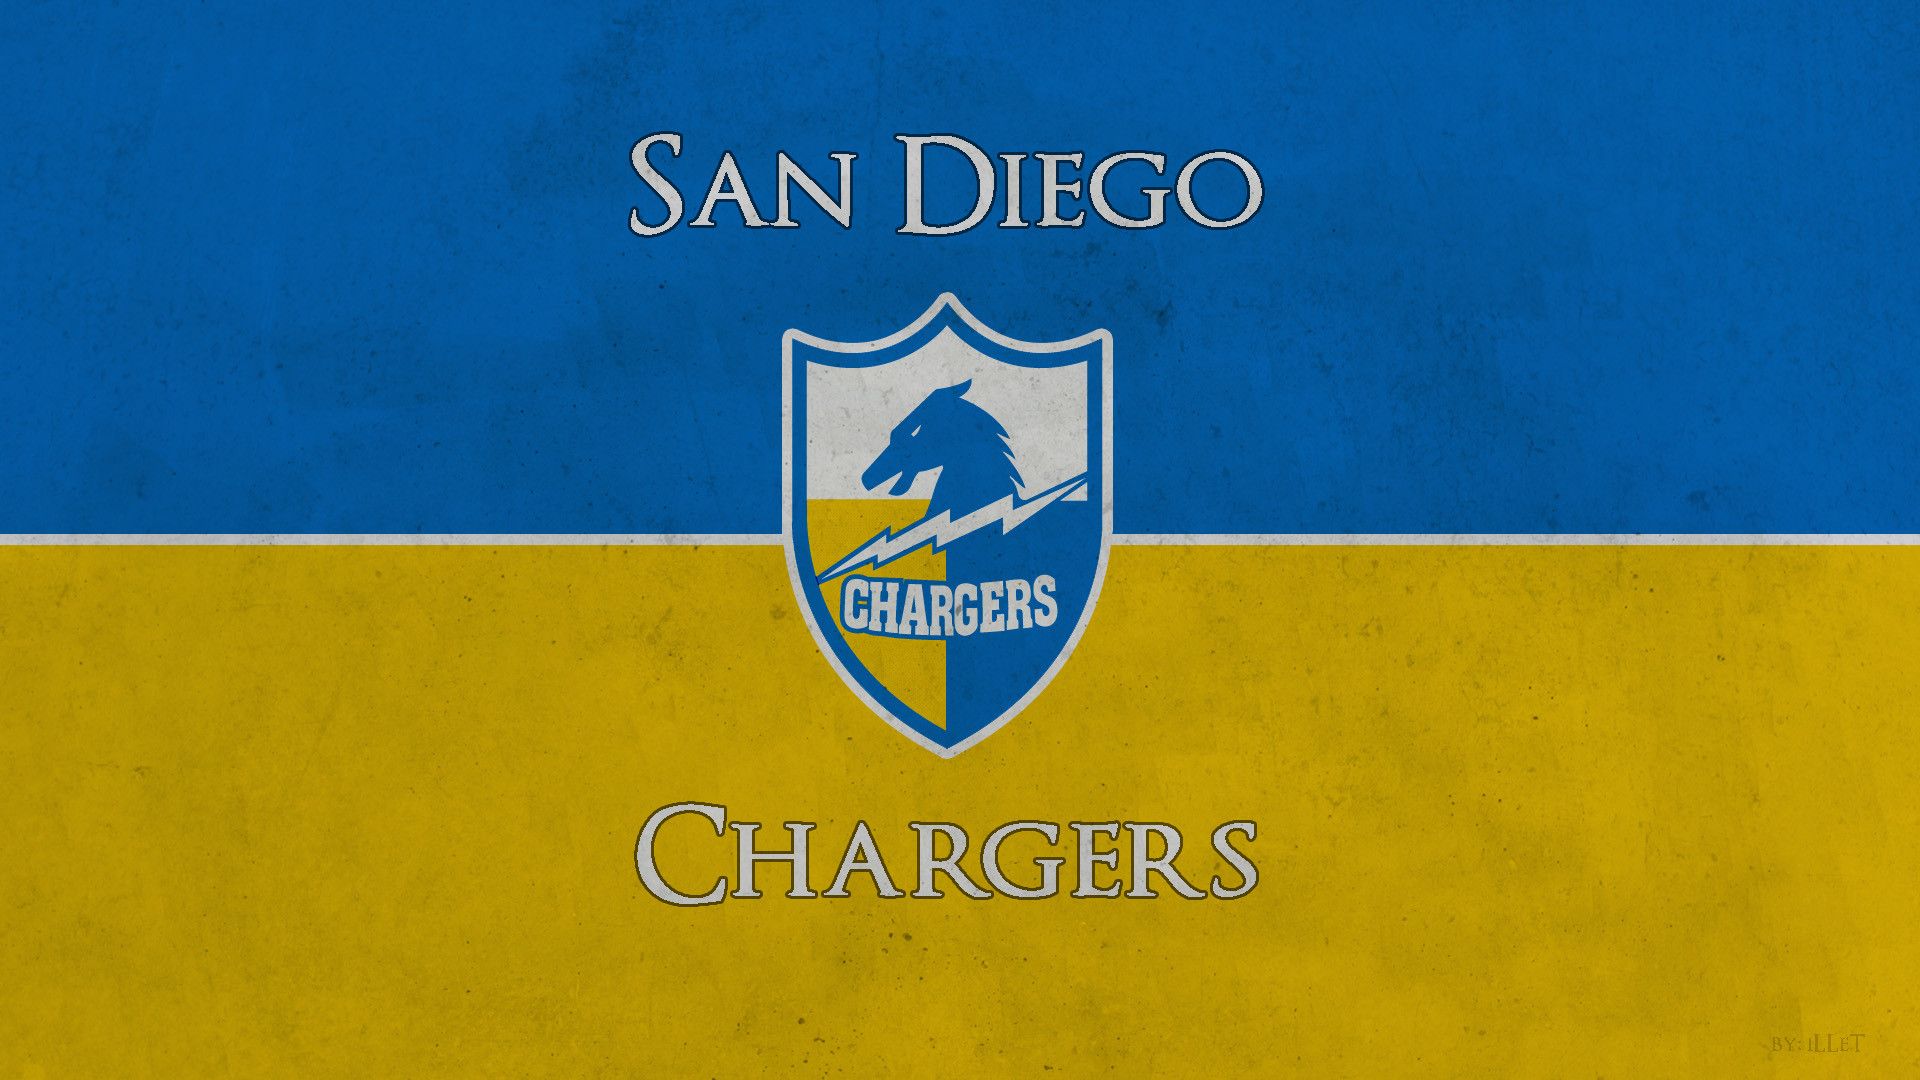 Chargers 2013 Wallpaper Schedule 1920x1080 Chargers